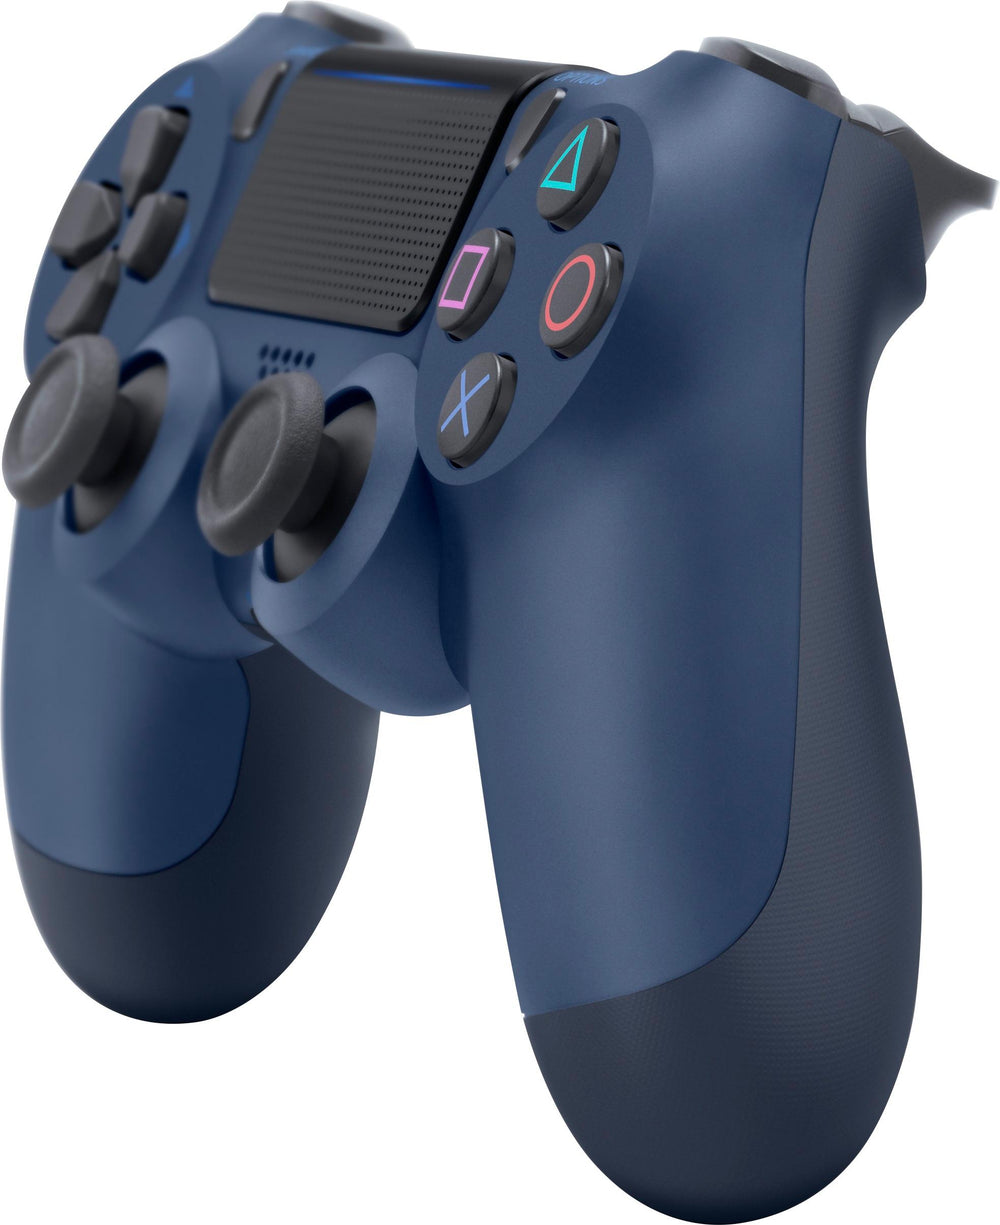 DualShock 4 Wireless Controller for Sony PlayStation 4 - Midnight Blue_1